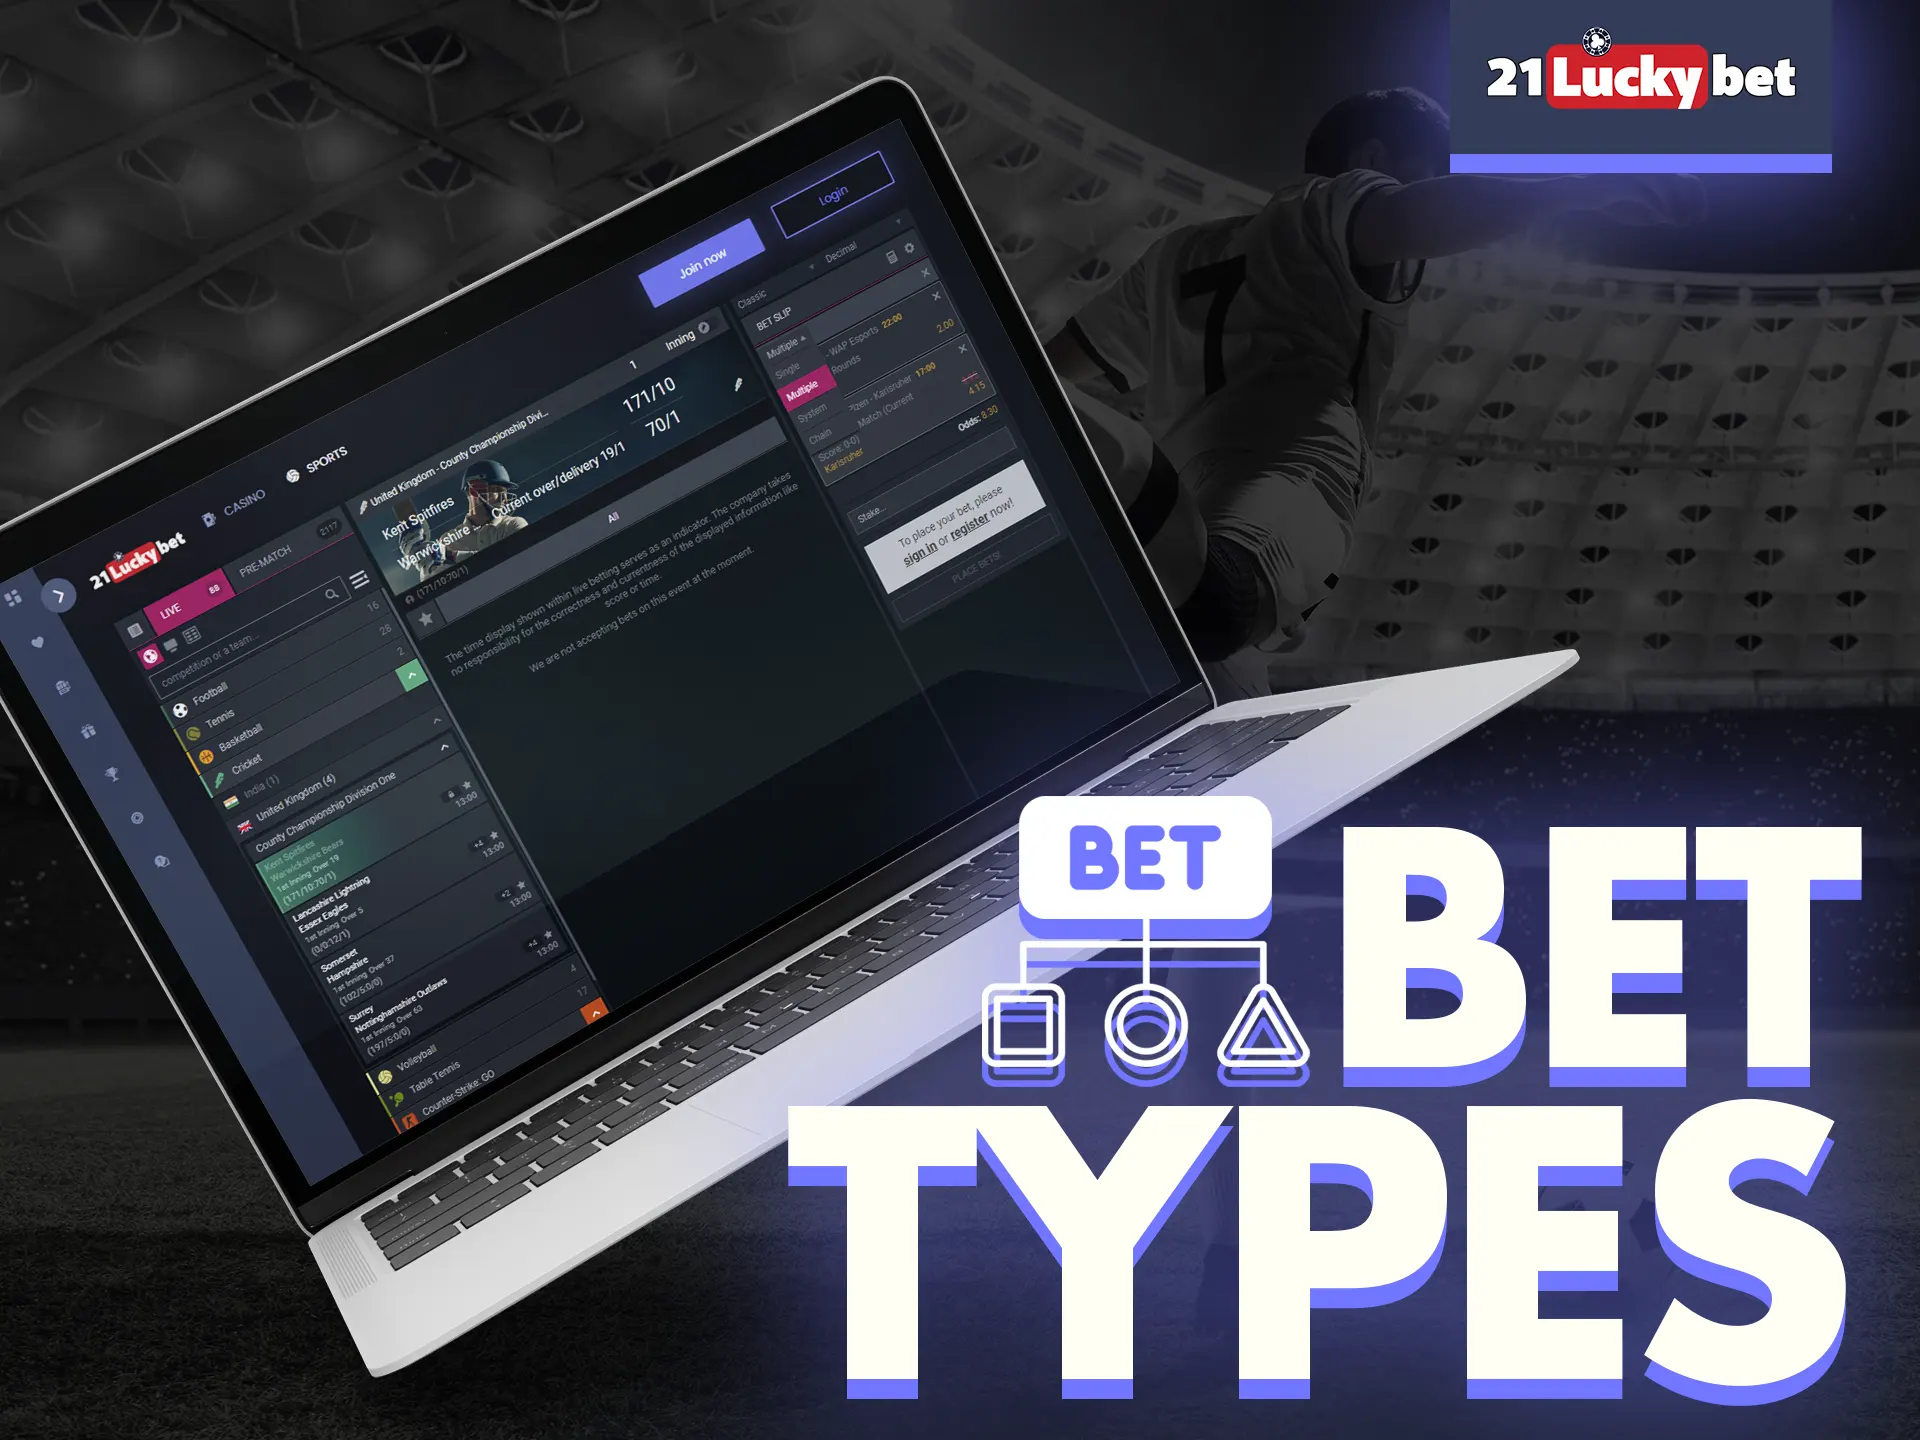 Use the different types of bets that are available at 21luckybet.